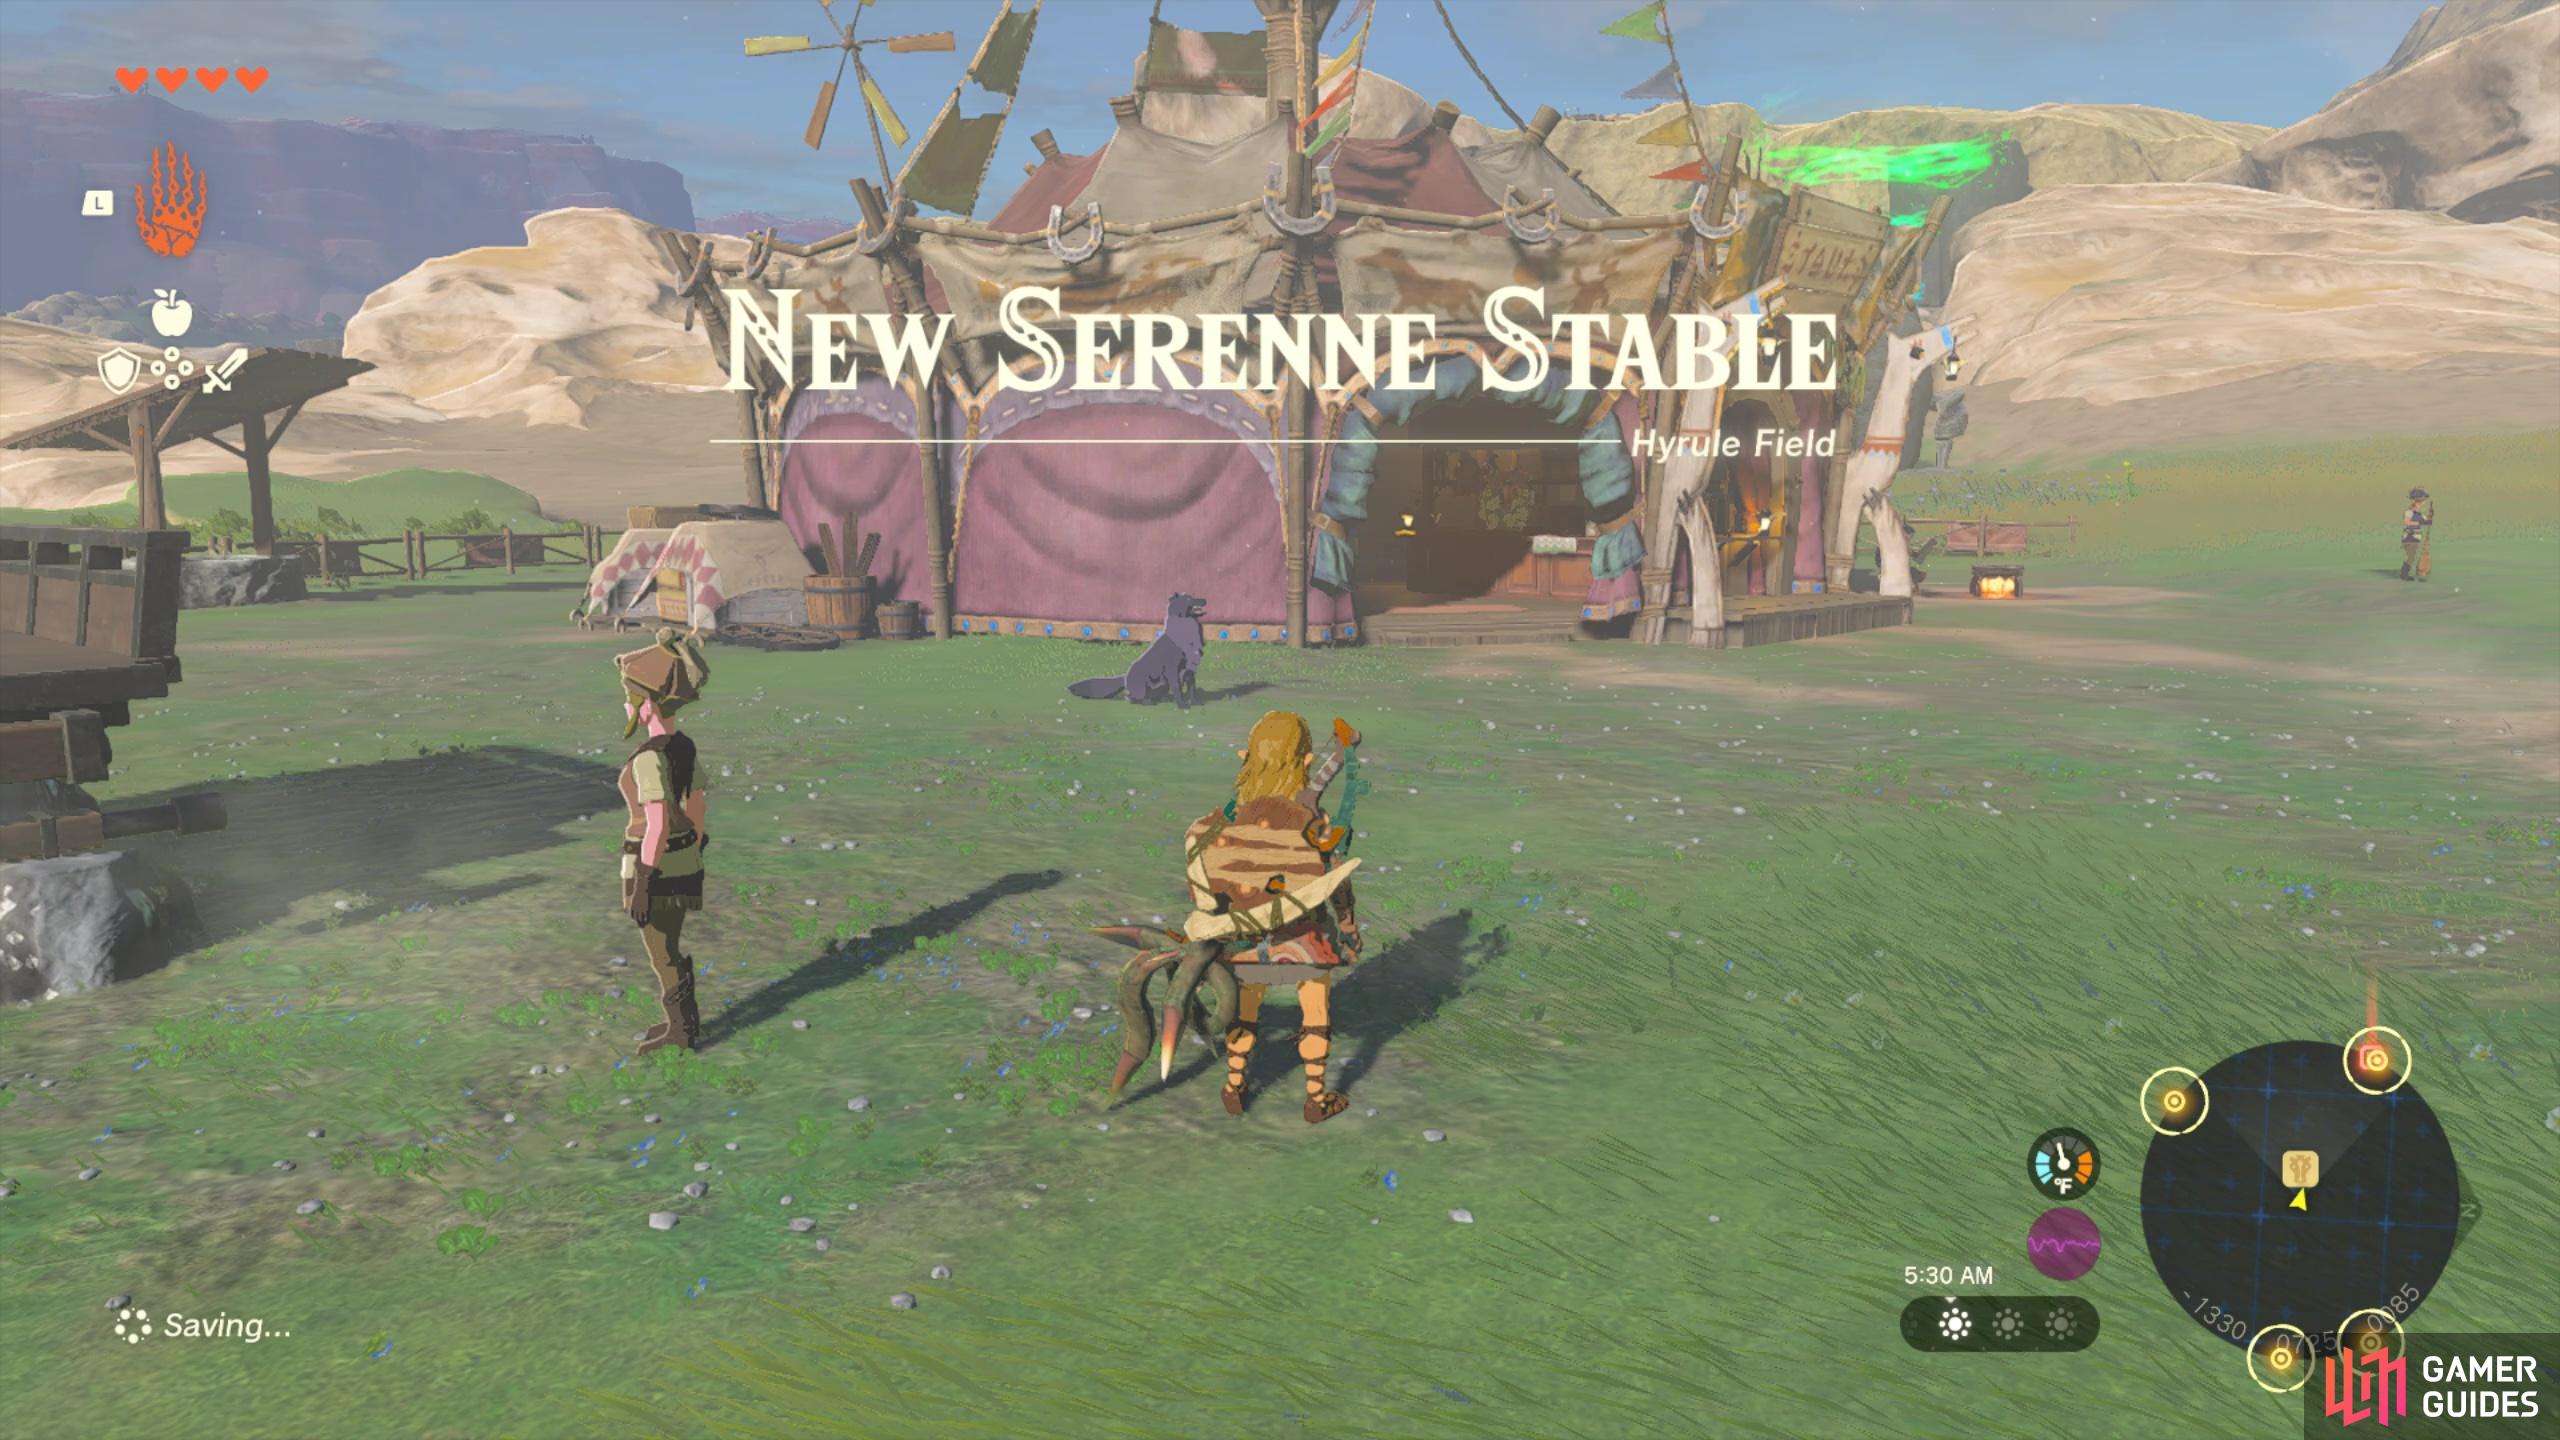 New Serenne Stable